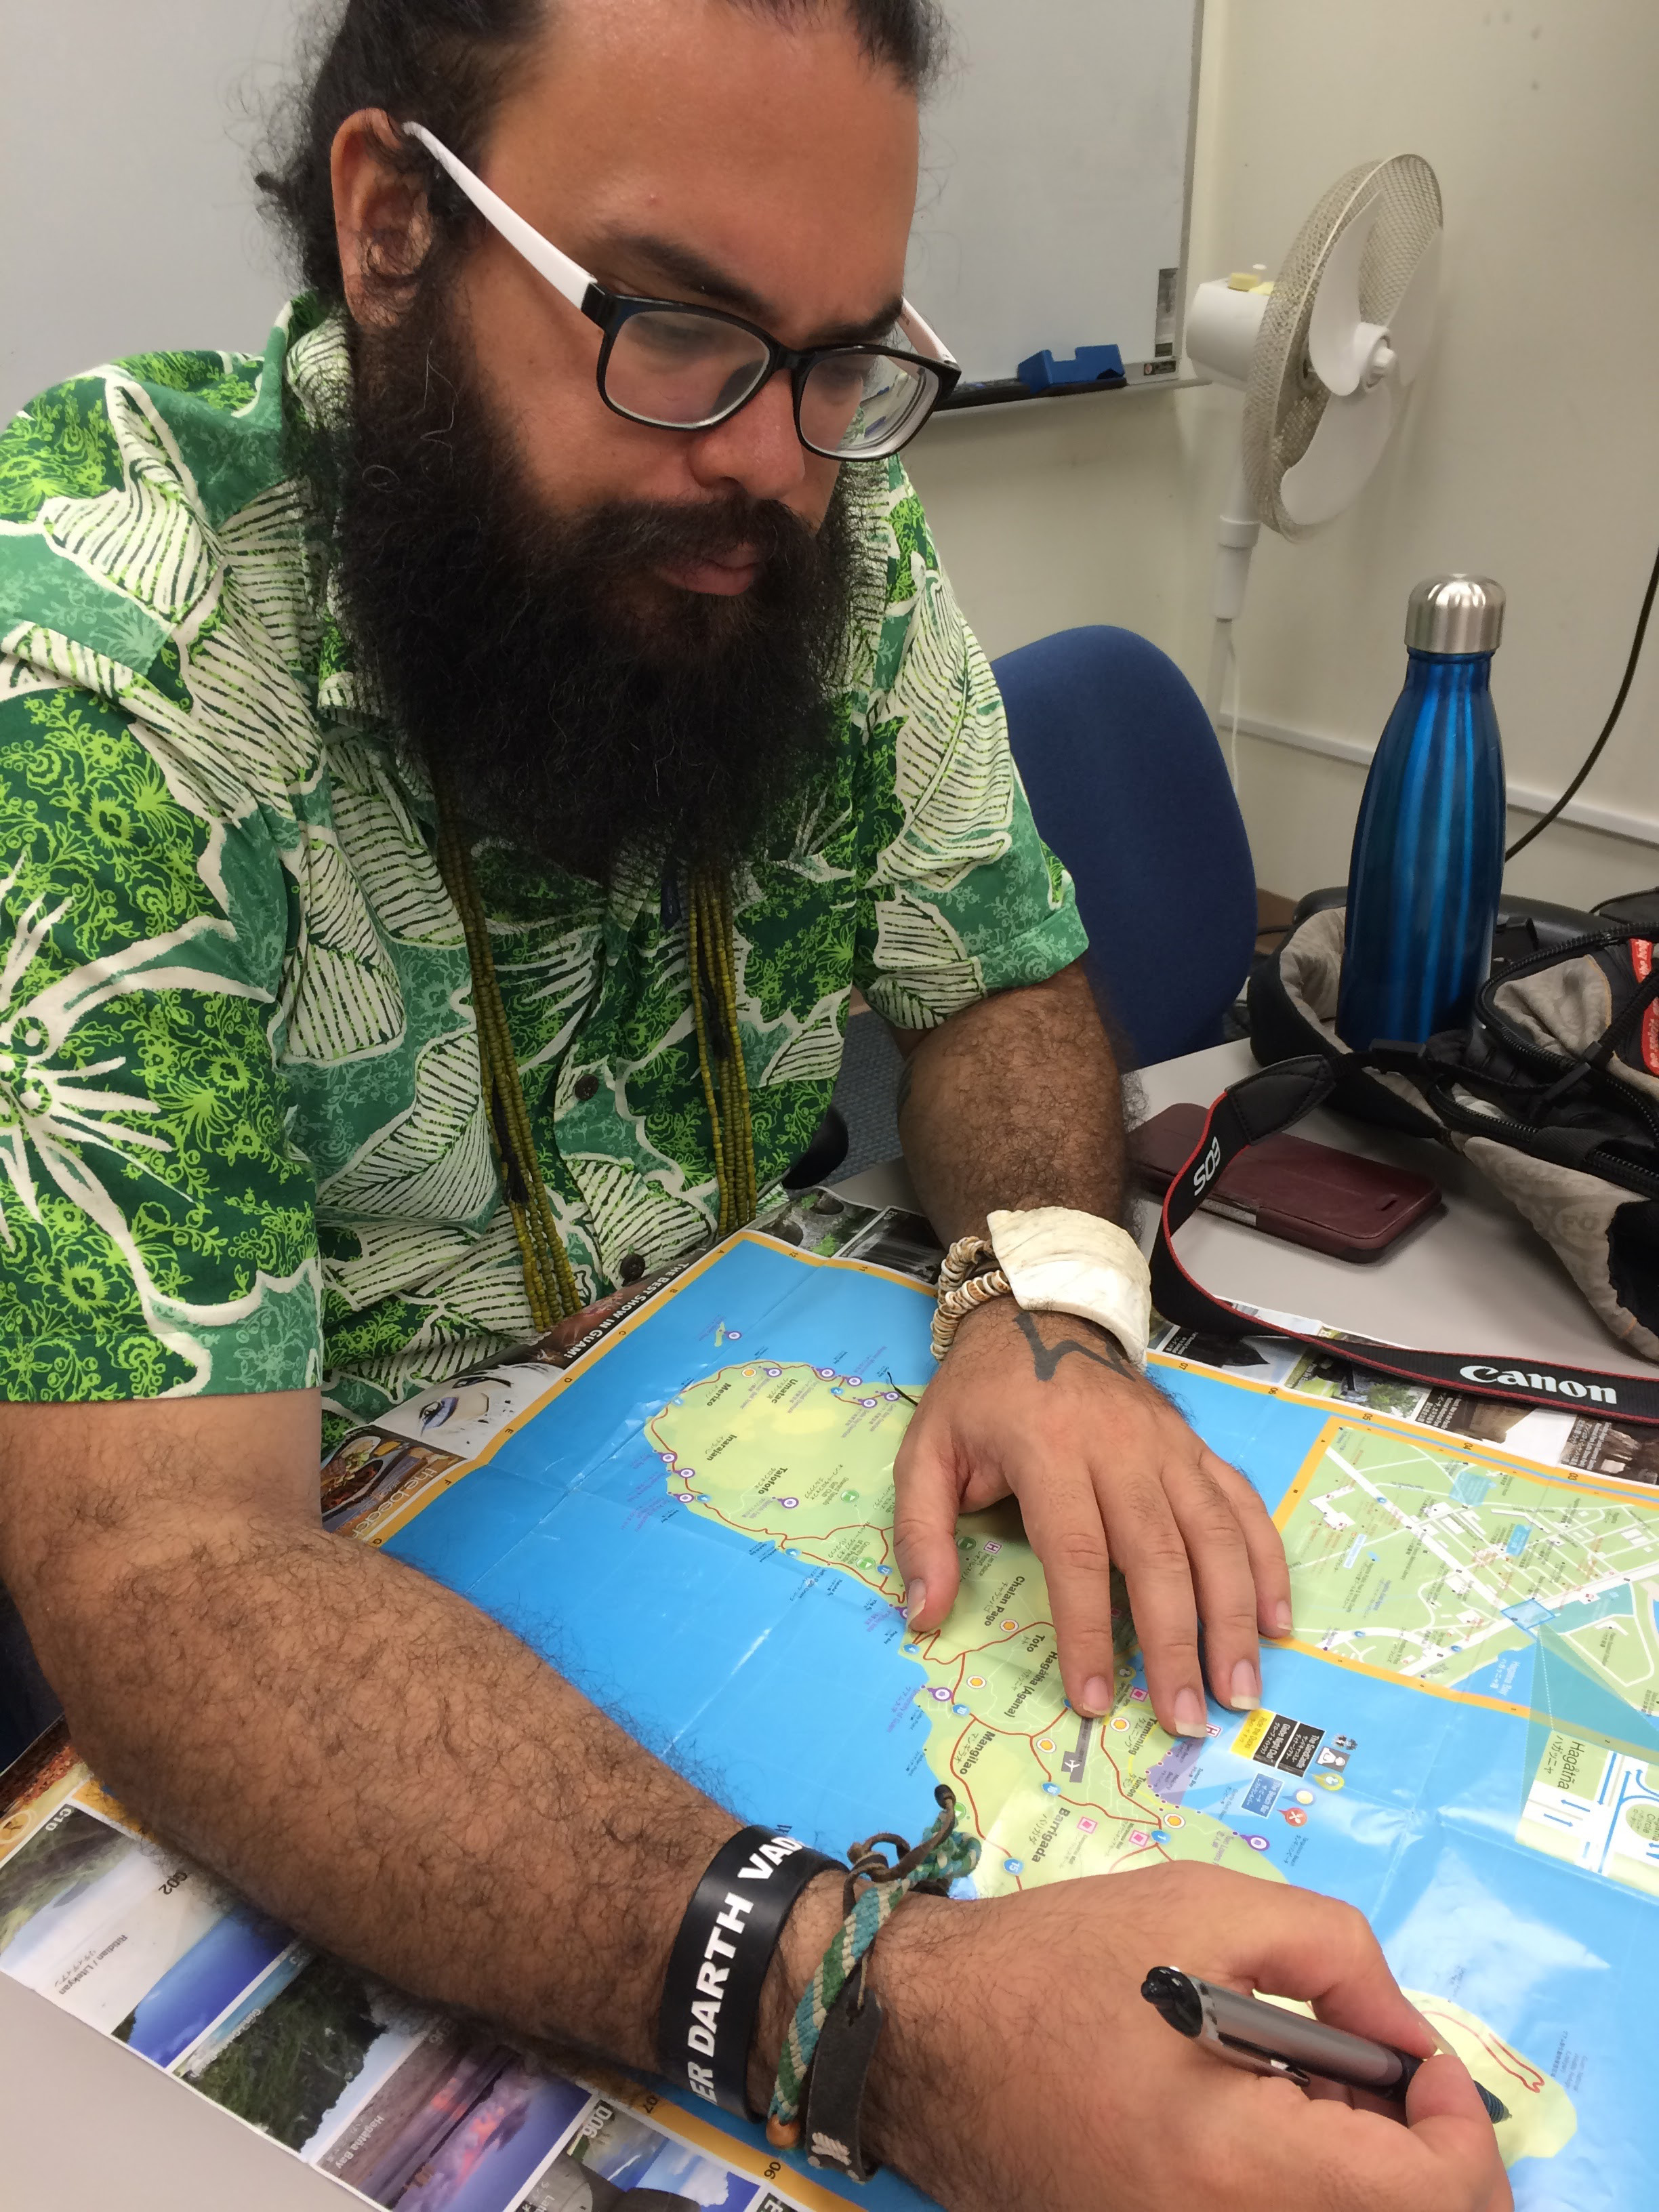 Michael Lujan Bevacqua uses a map to show where US bases on Guam are located. The military occupies nearly one-third of the island [Jon Letman]